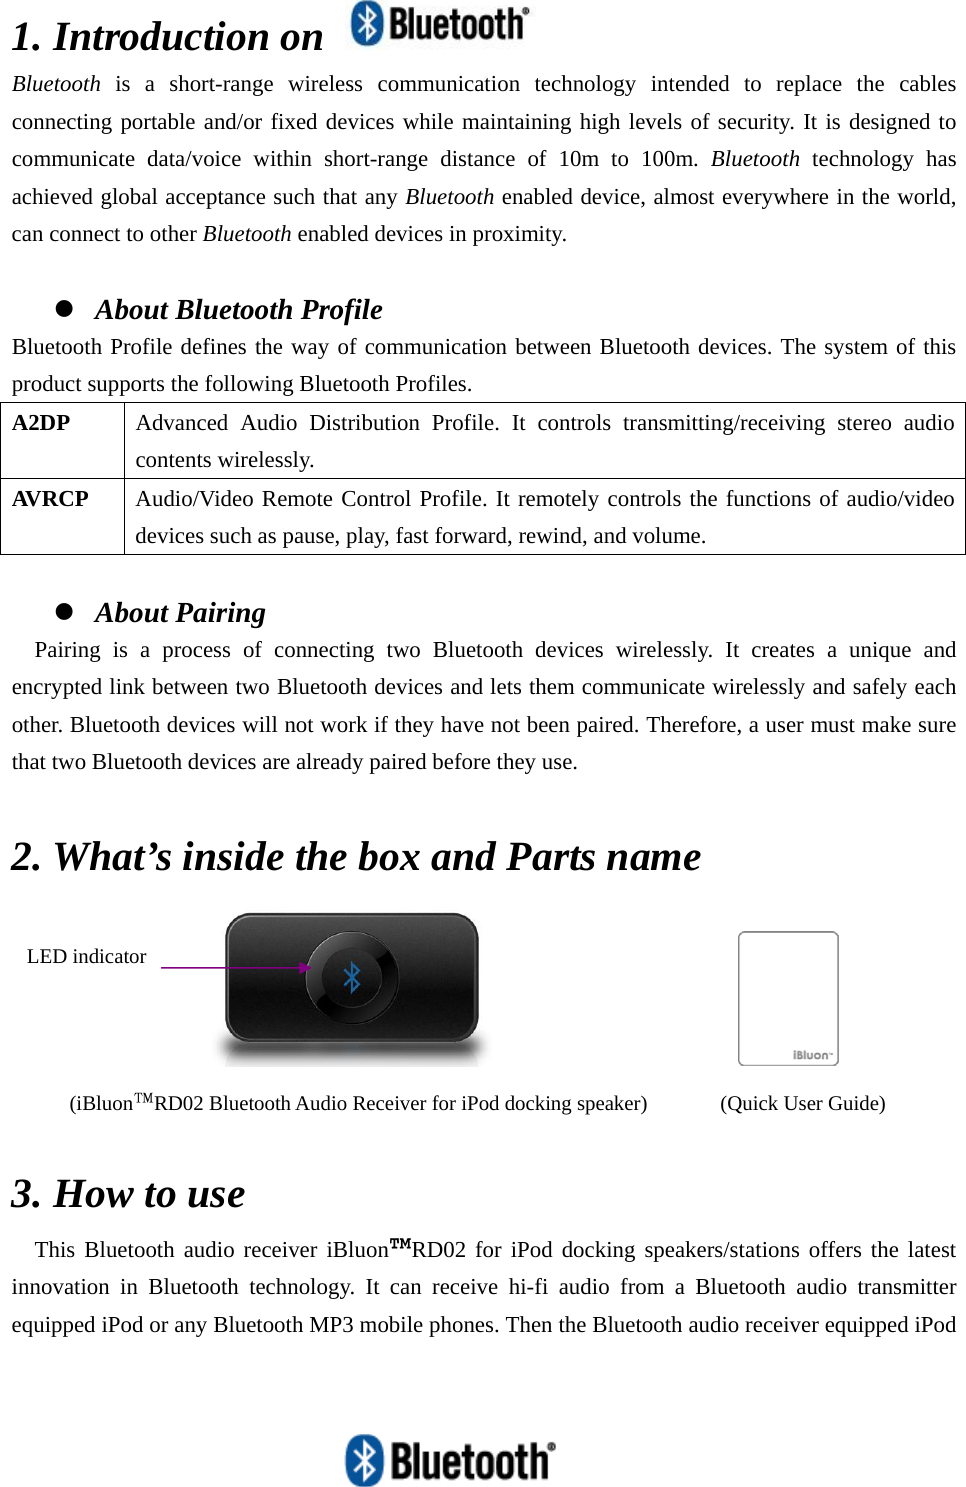   1. Introduction on   Bluetooth is a short-range wireless communication technology intended to replace the cables connecting portable and/or fixed devices while maintaining high levels of security. It is designed to communicate data/voice within short-range distance of 10m to 100m. Bluetooth technology has achieved global acceptance such that any Bluetooth enabled device, almost everywhere in the world, can connect to other Bluetooth enabled devices in proximity.  z About Bluetooth Profile Bluetooth Profile defines the way of communication between Bluetooth devices. The system of this product supports the following Bluetooth Profiles. A2DP  Advanced Audio Distribution Profile. It controls transmitting/receiving stereo audio contents wirelessly. AVRCP  Audio/Video Remote Control Profile. It remotely controls the functions of audio/video devices such as pause, play, fast forward, rewind, and volume.  z About Pairing Pairing is a process of connecting two Bluetooth devices wirelessly. It creates a unique and encrypted link between two Bluetooth devices and lets them communicate wirelessly and safely each other. Bluetooth devices will not work if they have not been paired. Therefore, a user must make sure that two Bluetooth devices are already paired before they use.  2. What’s inside the box and Parts name                        3. How to use This Bluetooth audio receiver iBluon™RD02 for iPod docking speakers/stations offers the latest innovation in Bluetooth technology. It can receive hi-fi audio from a Bluetooth audio transmitter equipped iPod or any Bluetooth MP3 mobile phones. Then the Bluetooth audio receiver equipped iPod (iBluon™RD02 Bluetooth Audio Receiver for iPod docking speaker)  (Quick User Guide) LED indicator 